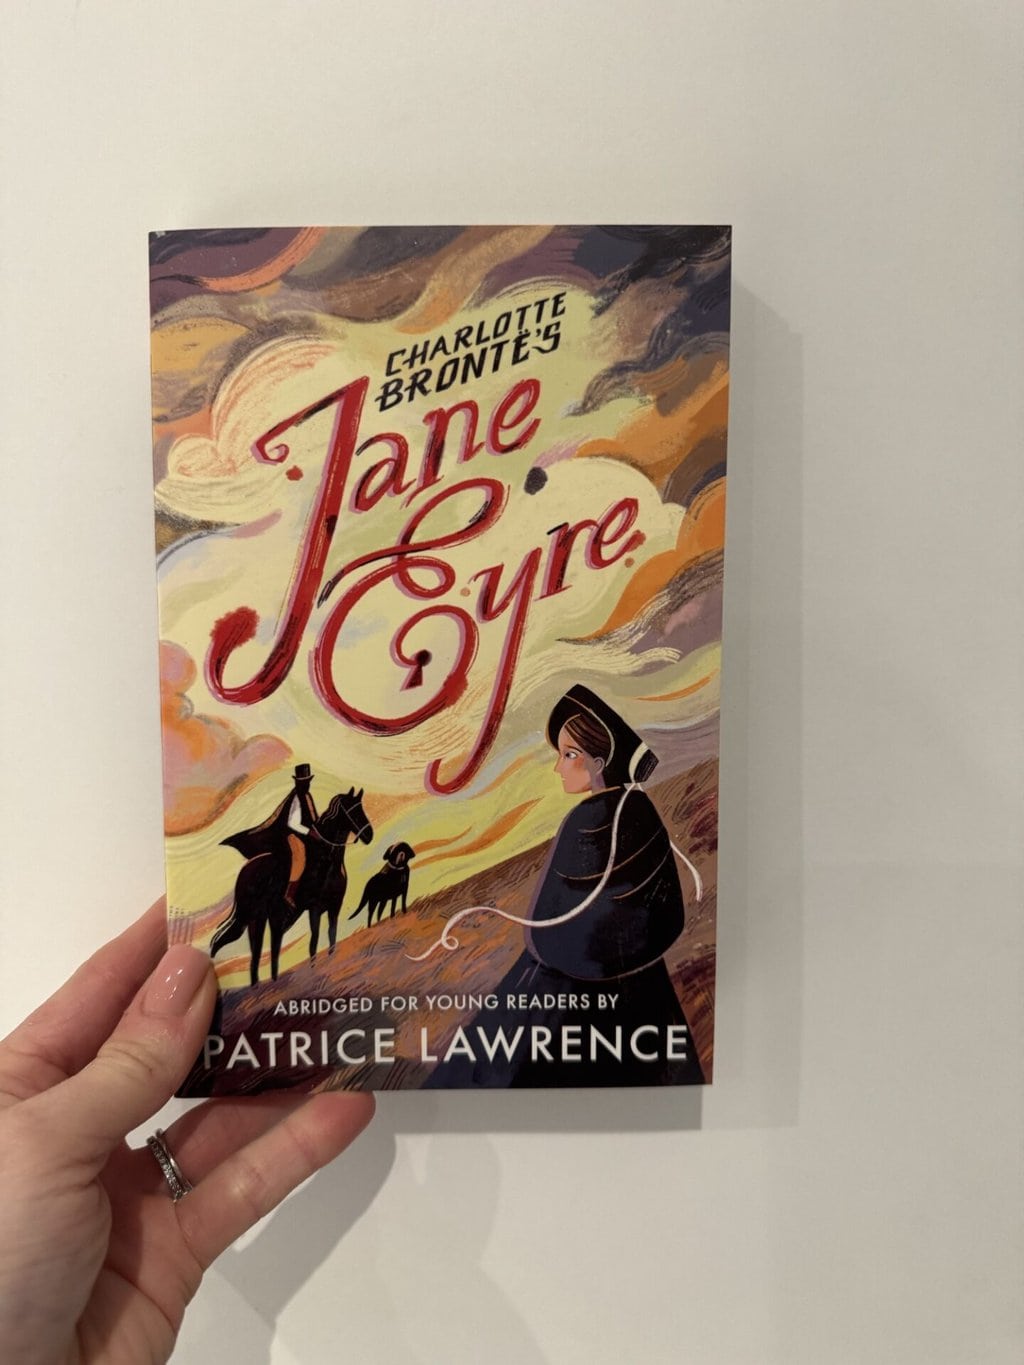 Jane Eyre (abridged for young readers by Patrice Lawrence